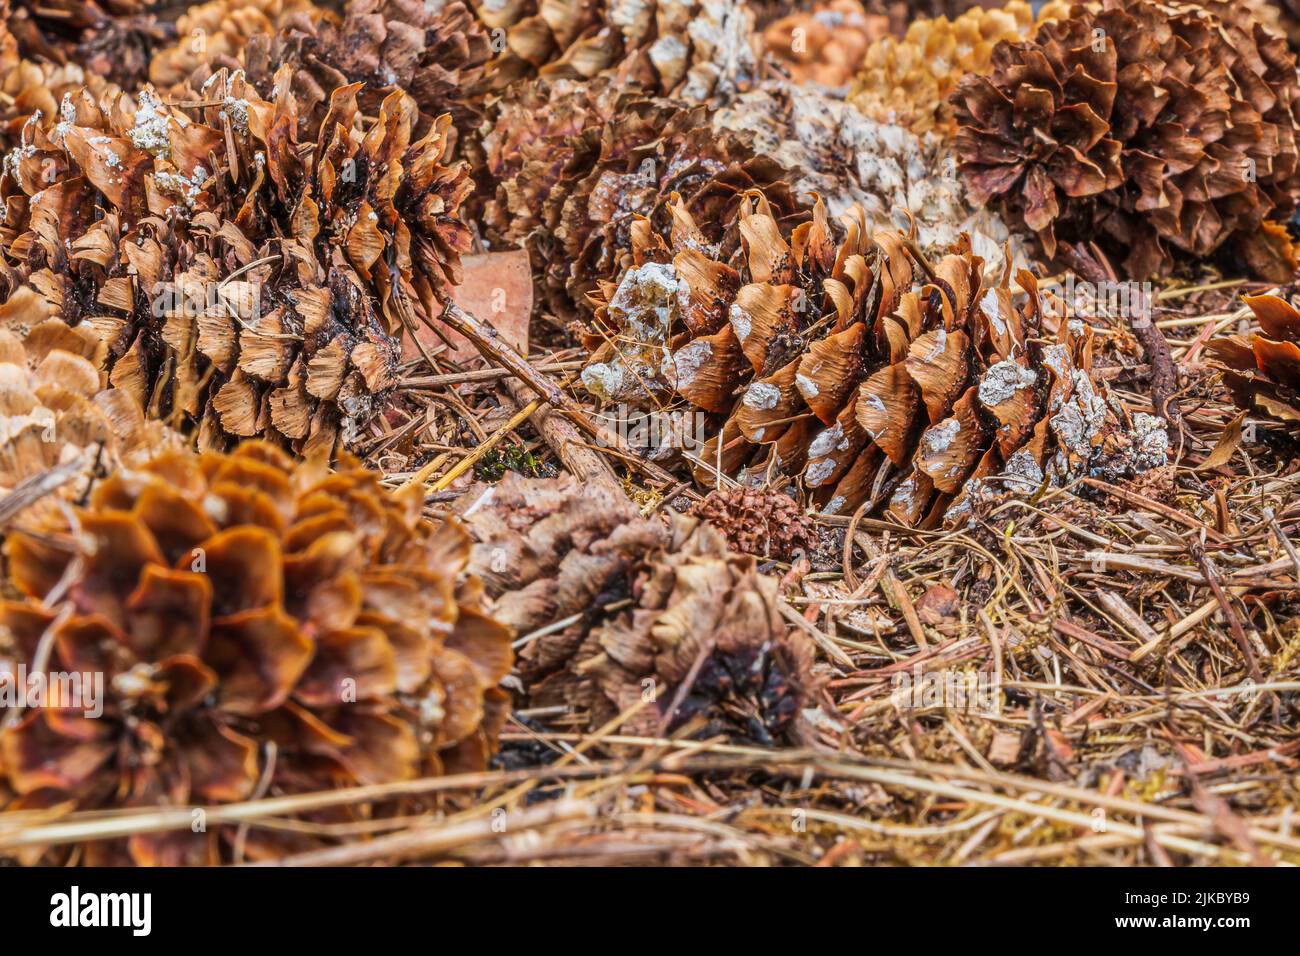 Pine cones lying on the ground. several brown open pine cones between brown pine needles. Structures of the empty pine cone with resin adhesion Stock Photo